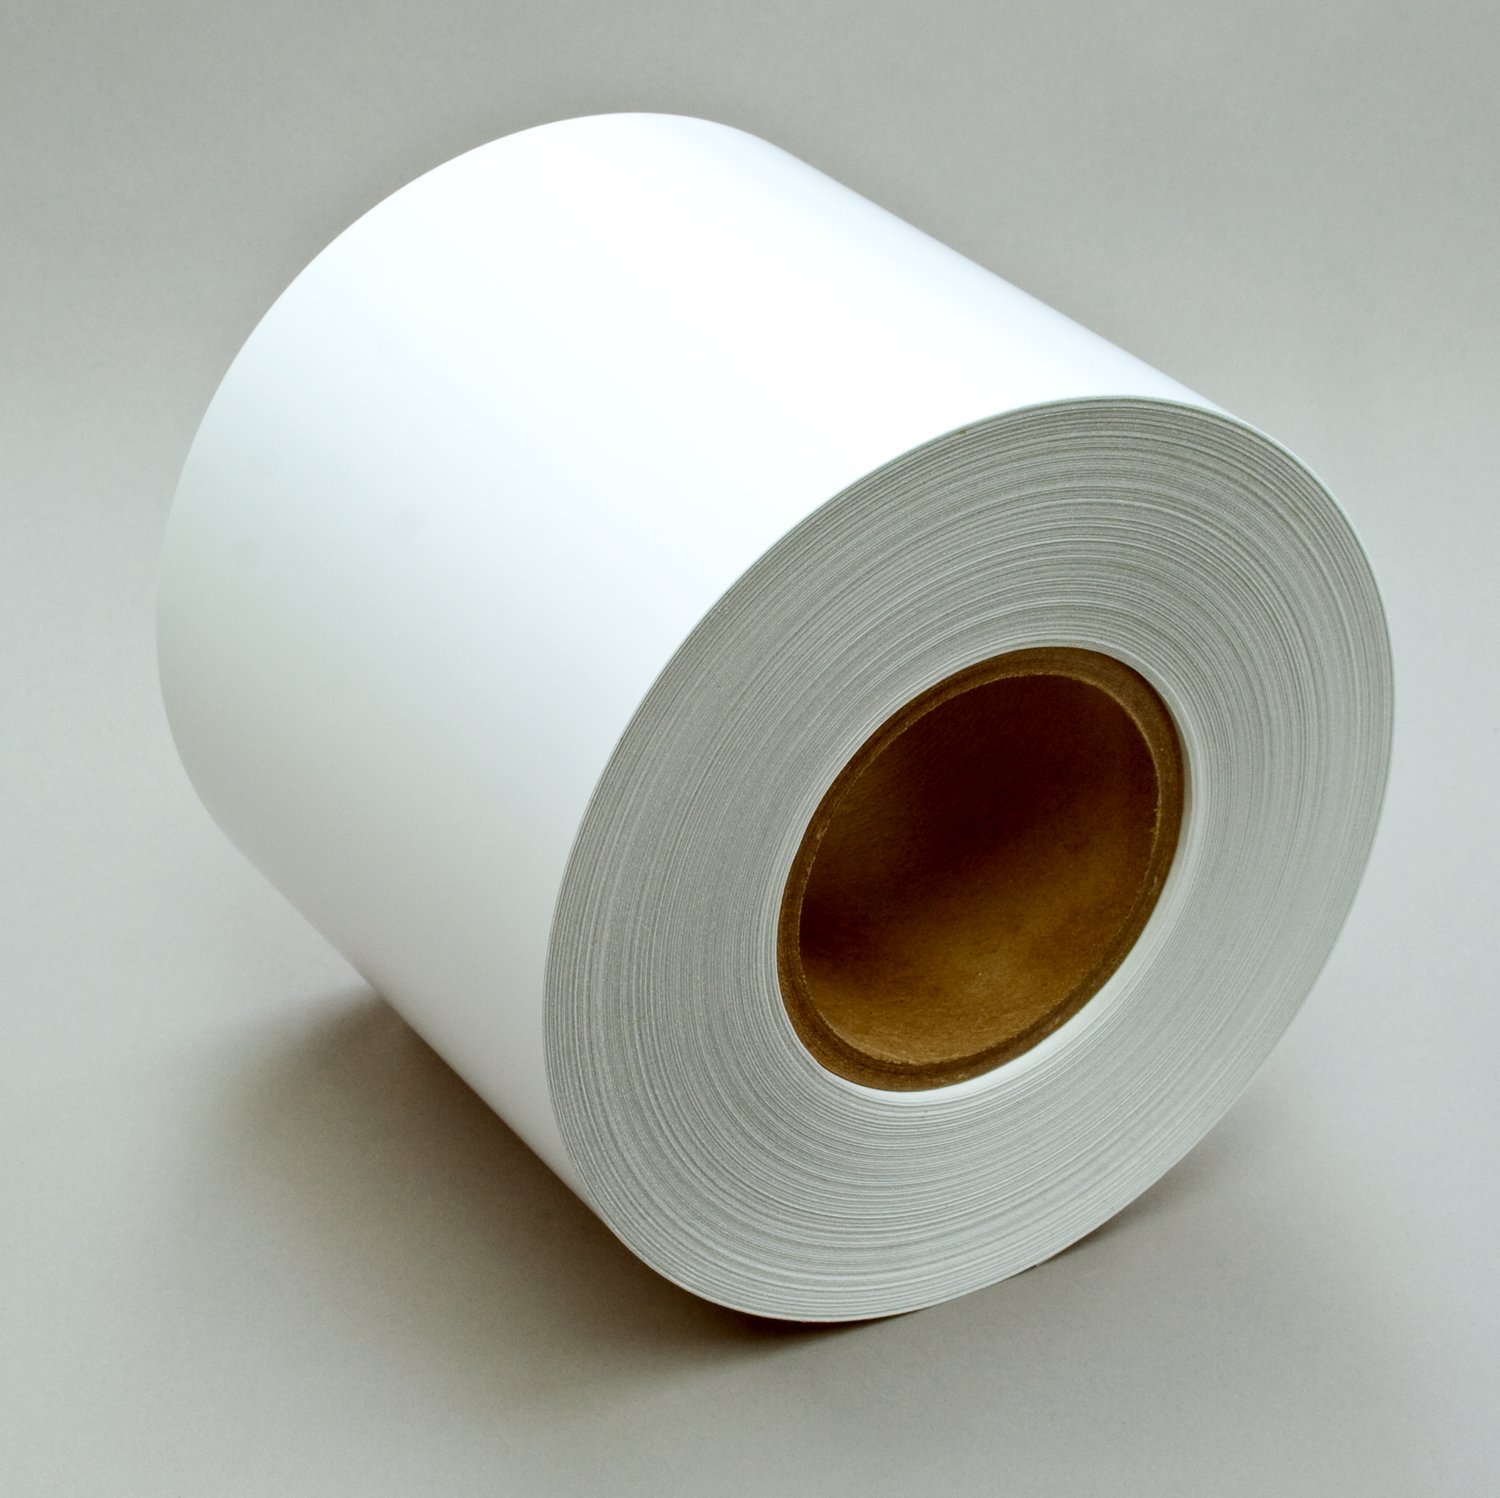 3M Dot Matrix Label Material 7883, Silver Polyester Matte, 6 in x 1668 ft, 1 Roll/Case